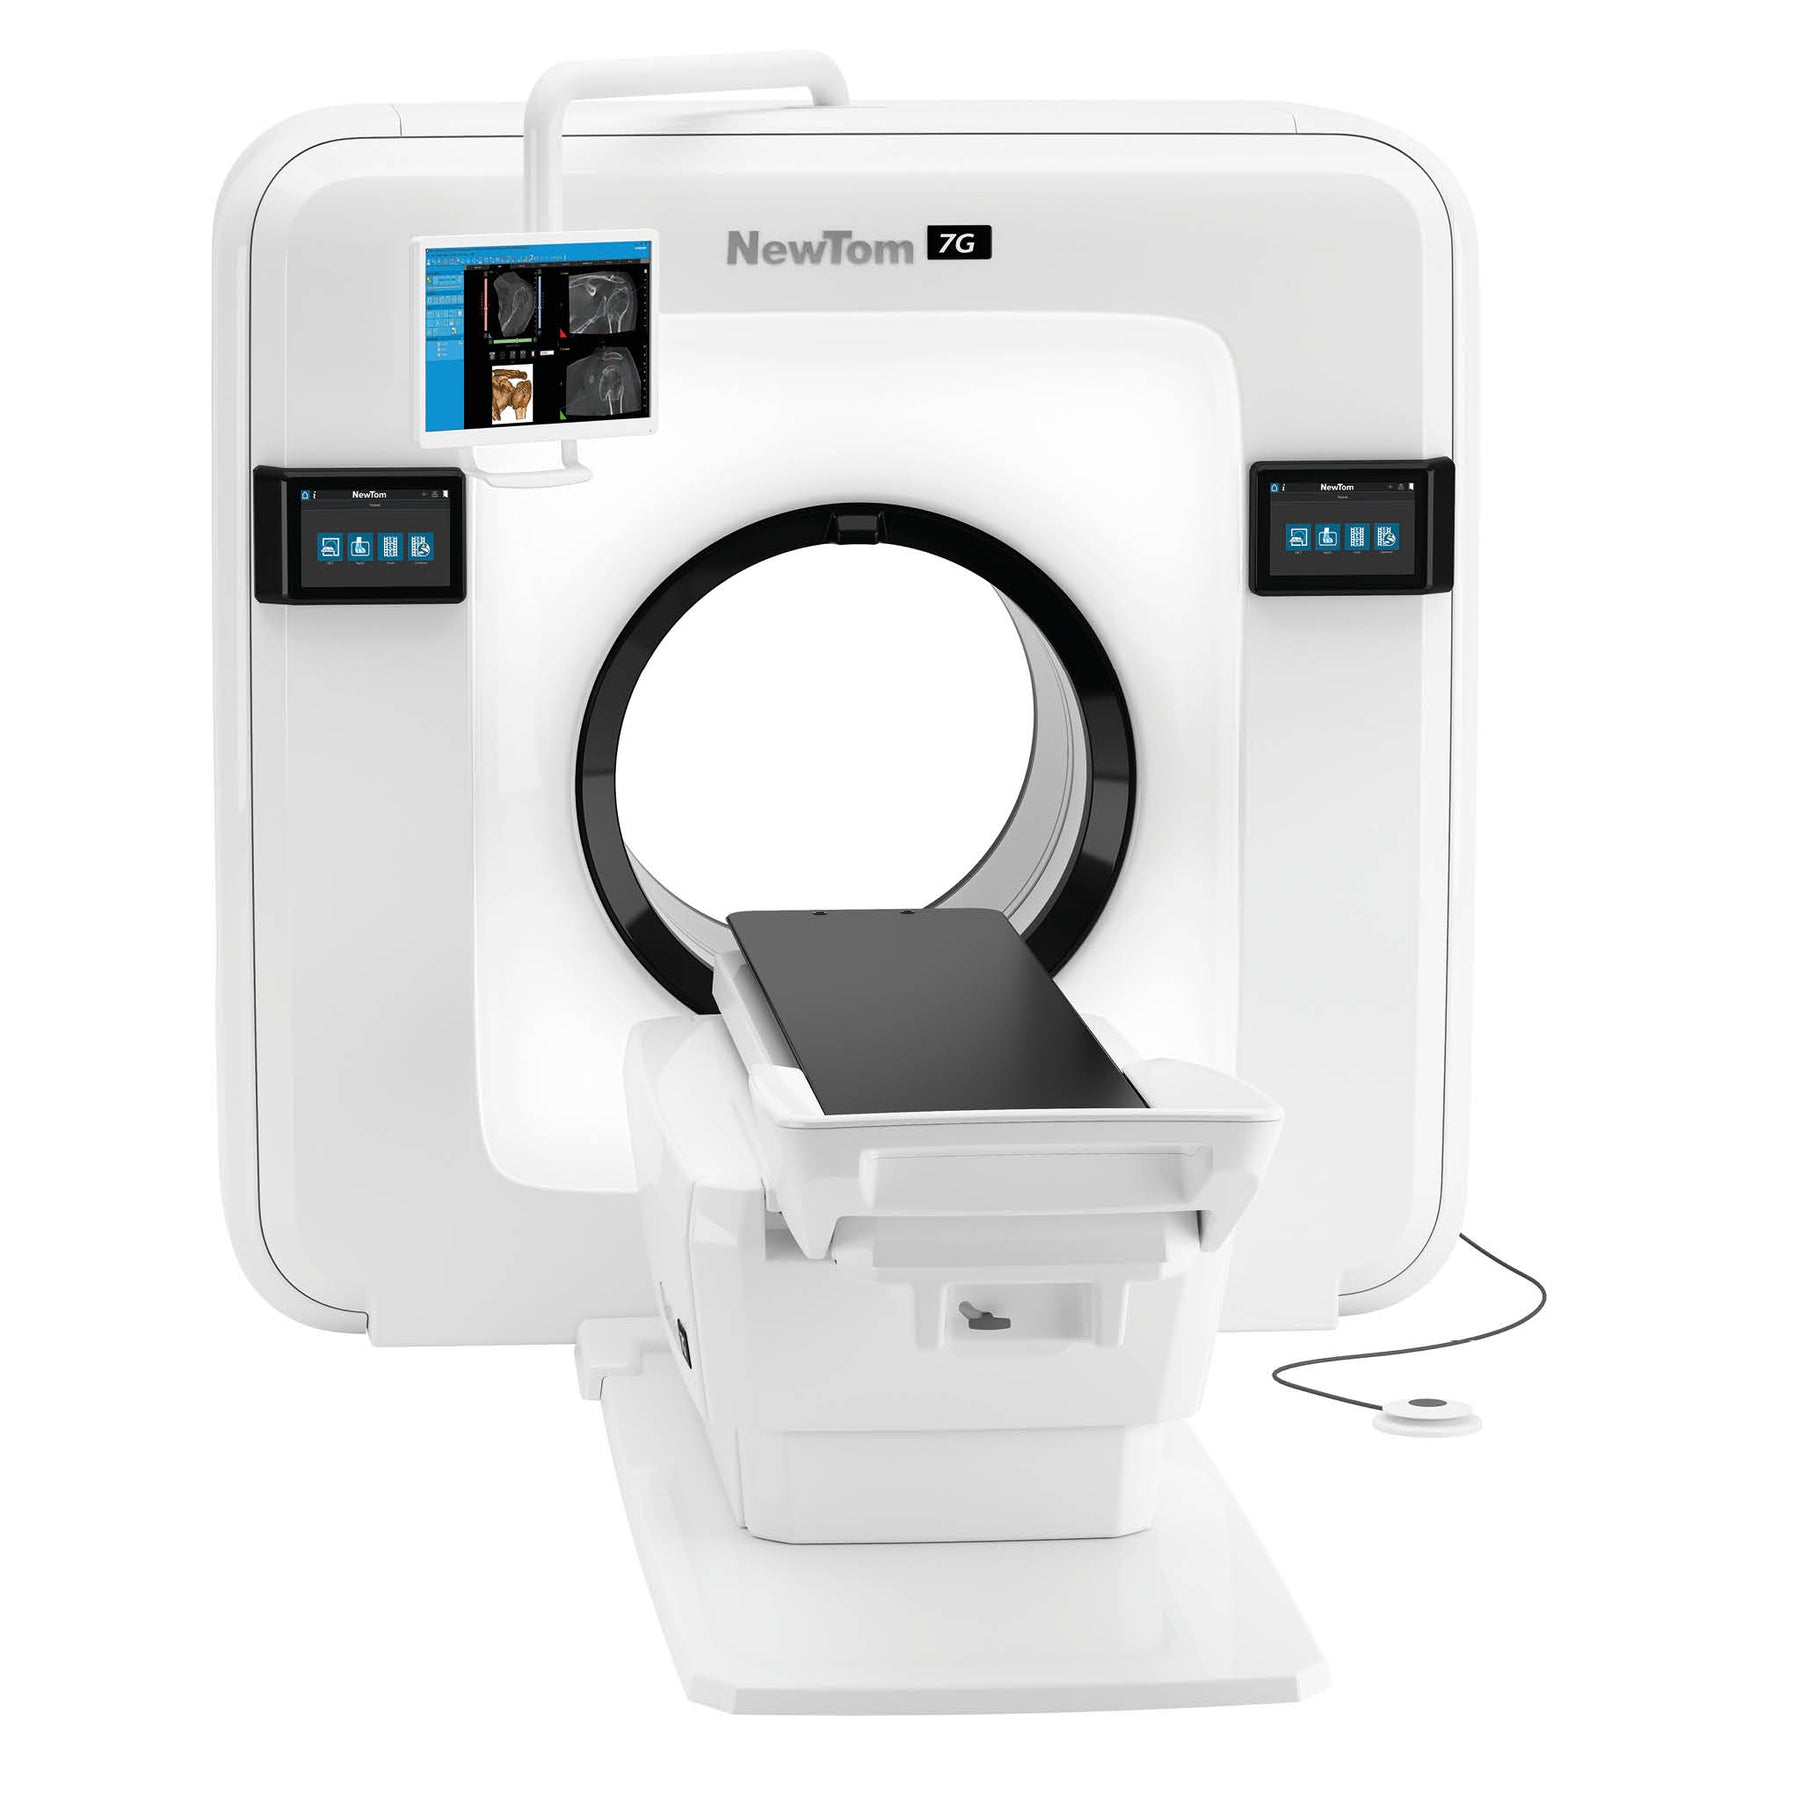 NewTom 7G is the most advanced CBCT device on the market. Front panel.